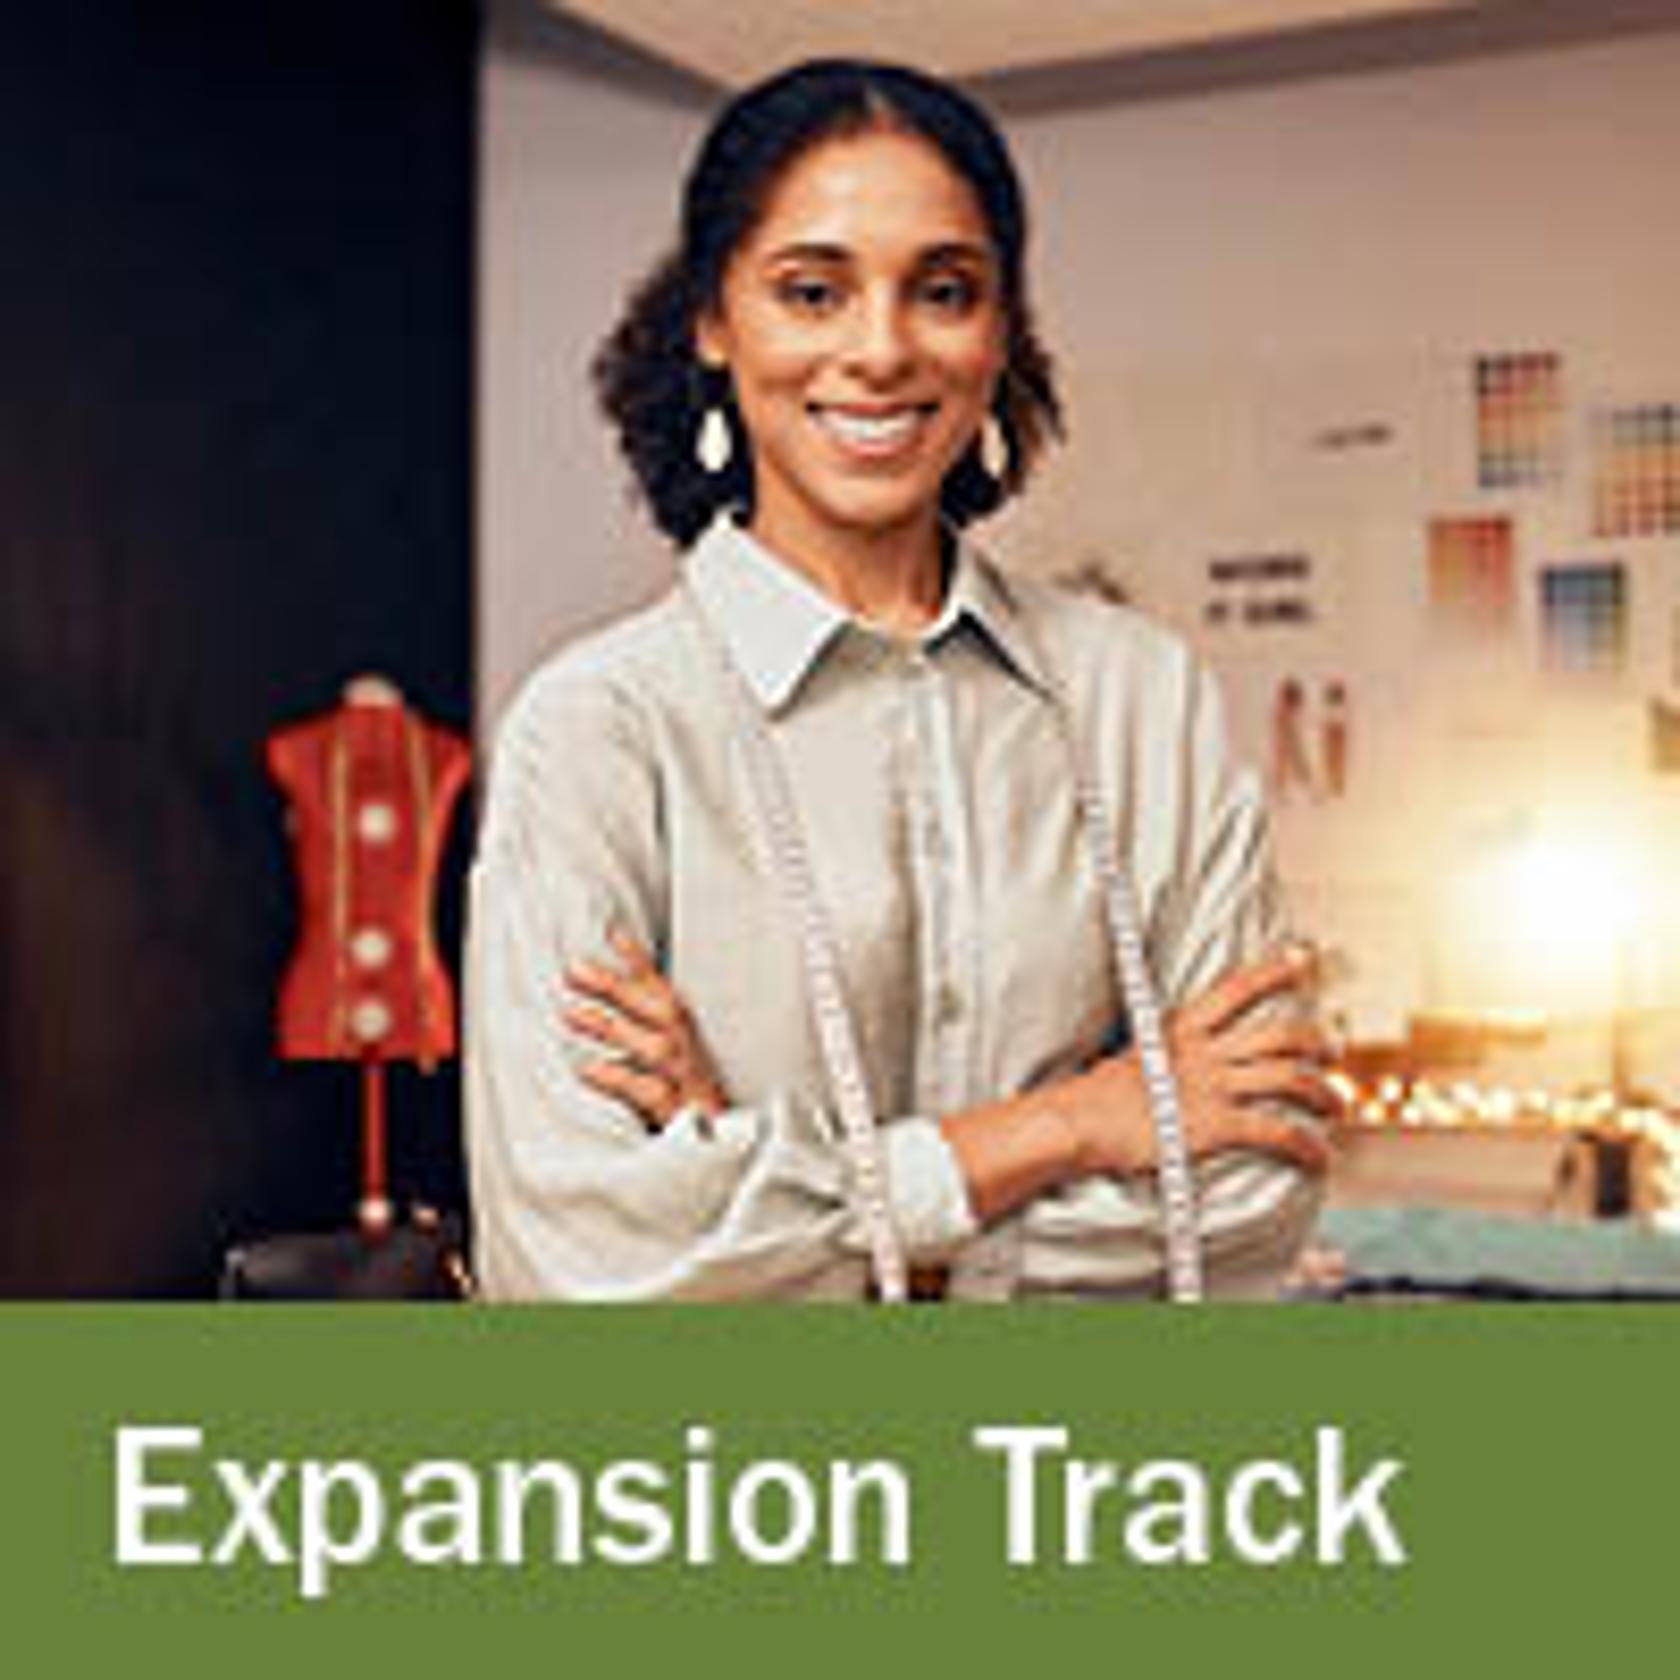 Expansion Track